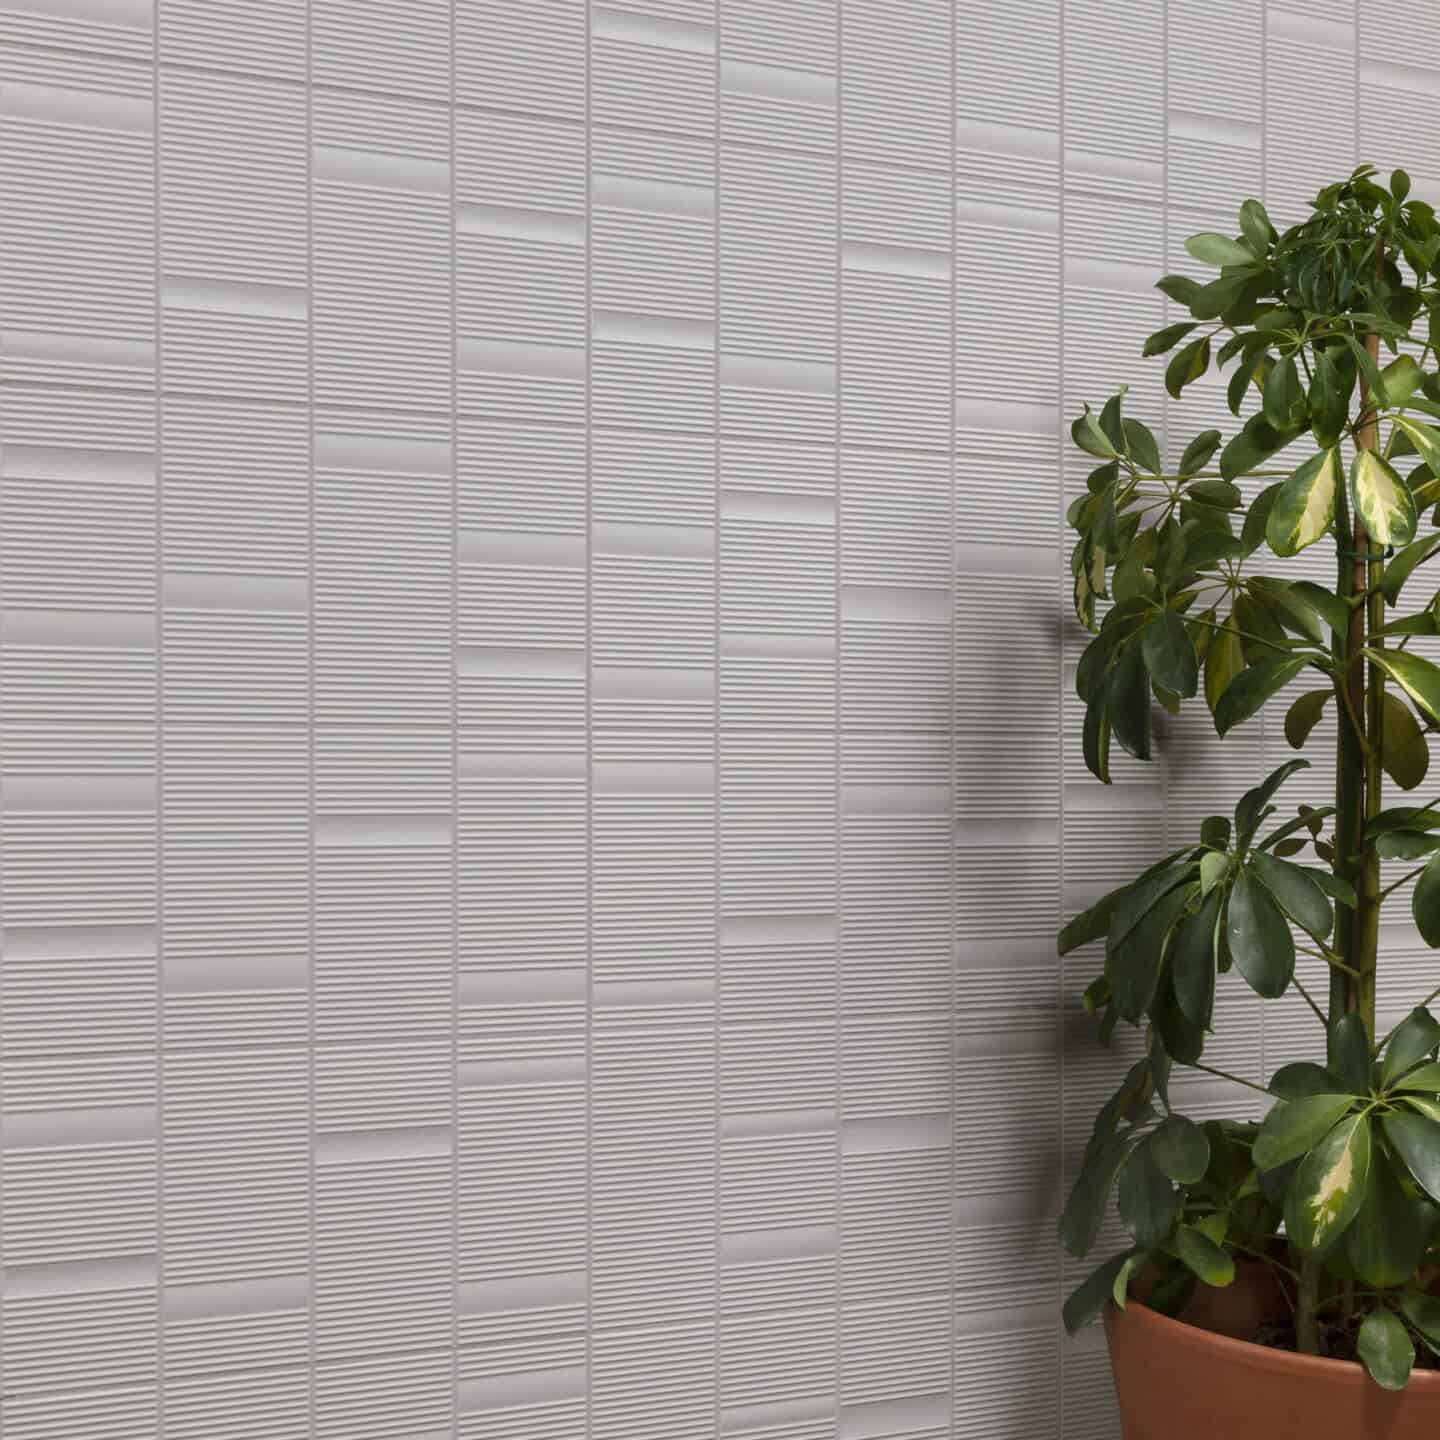 Grey textured wall tiles with a plant in front